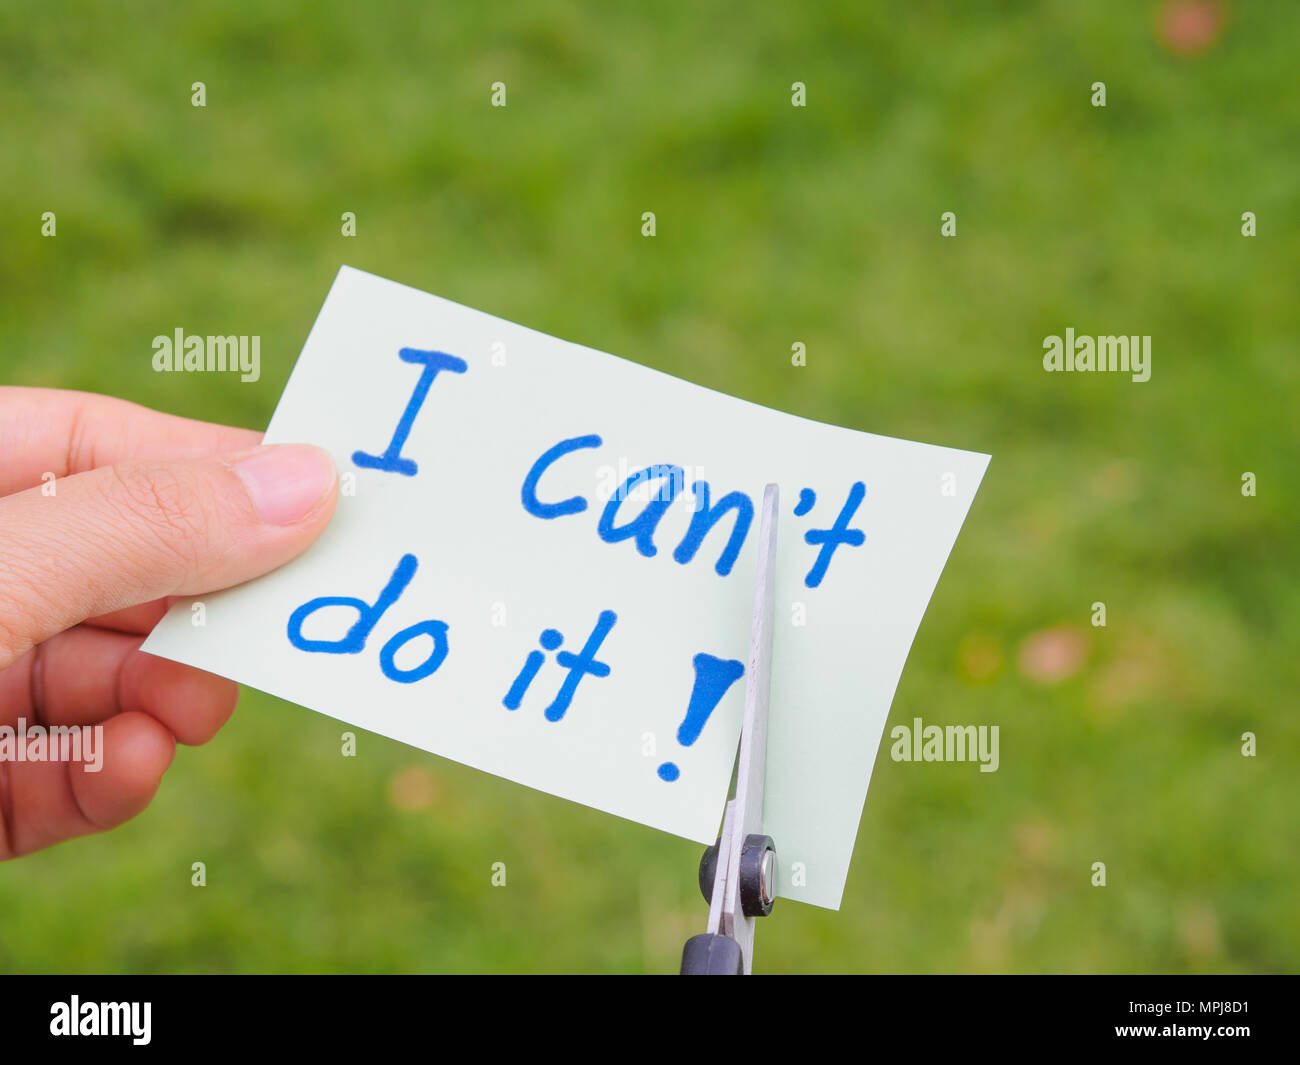 Women Using Scissors To Remove The Word Can T To Read I Can Do It Concept For Self Belief Positive Attitude And Motivation Stock Photo Alamy